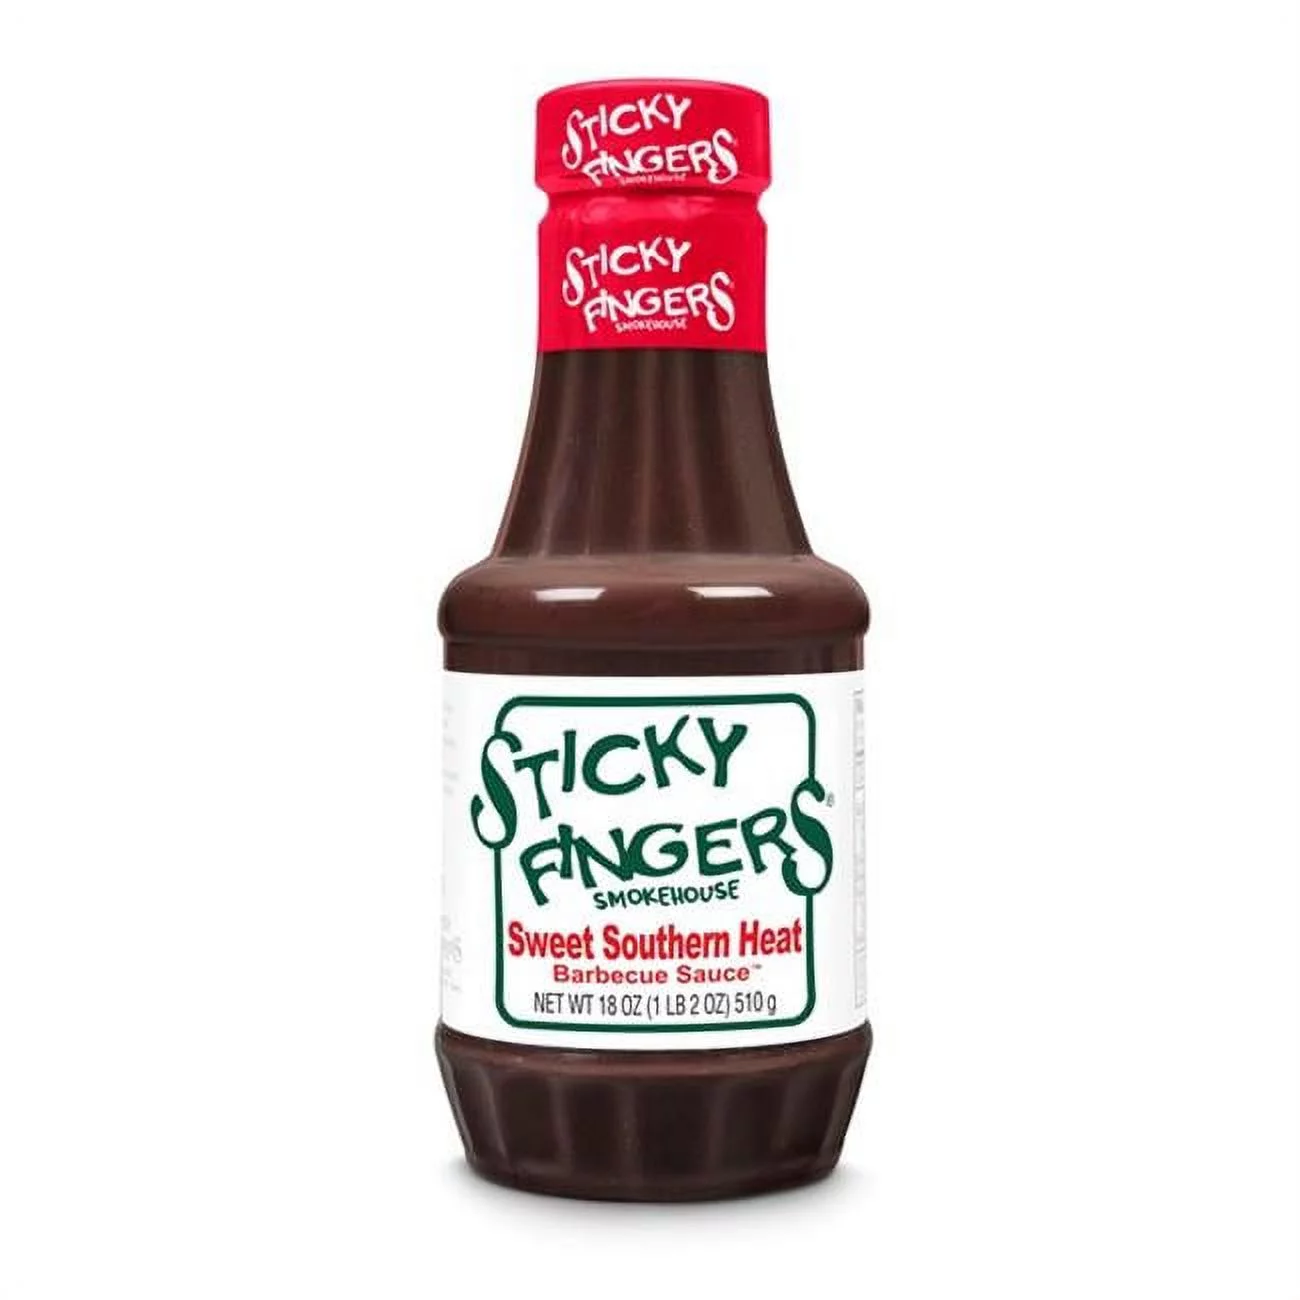 STICKY FINGERS SAUCE BBQ SWT SOUTHERN HEAT-18 OZ -Pack of 3 - $13.00